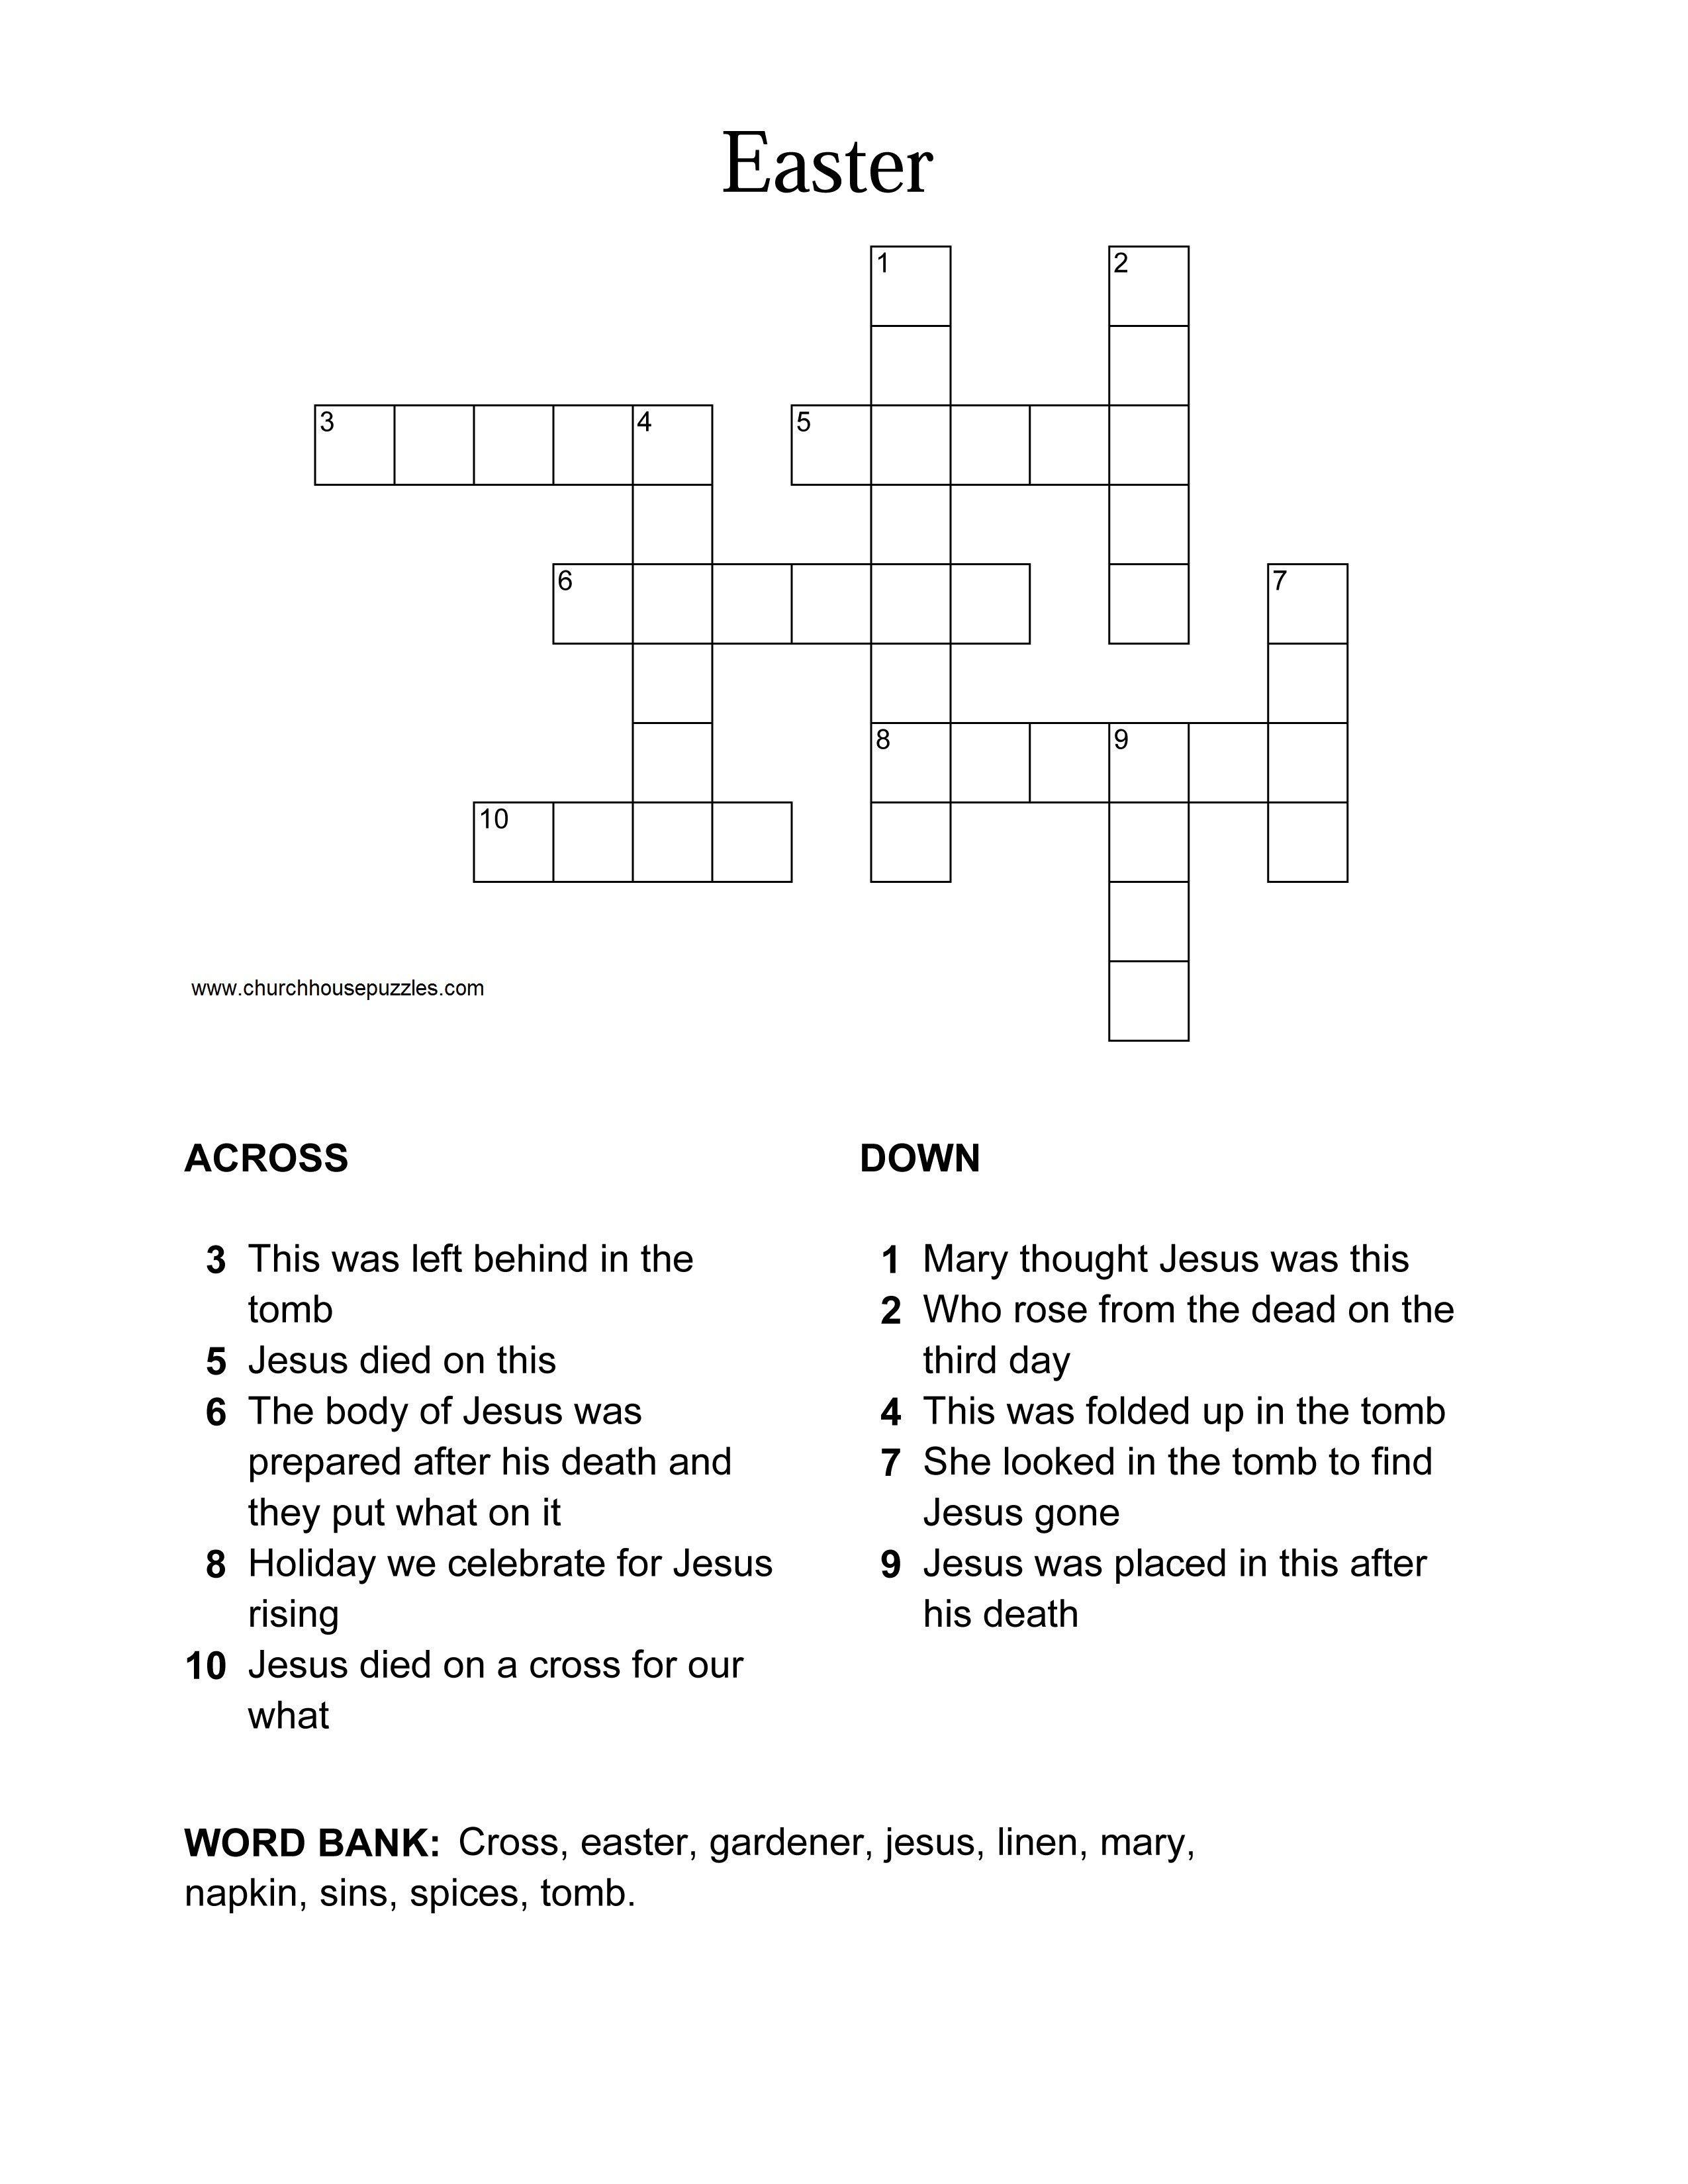 Easter Crossword Puzzle - Printable Crossword Puzzles For Easter